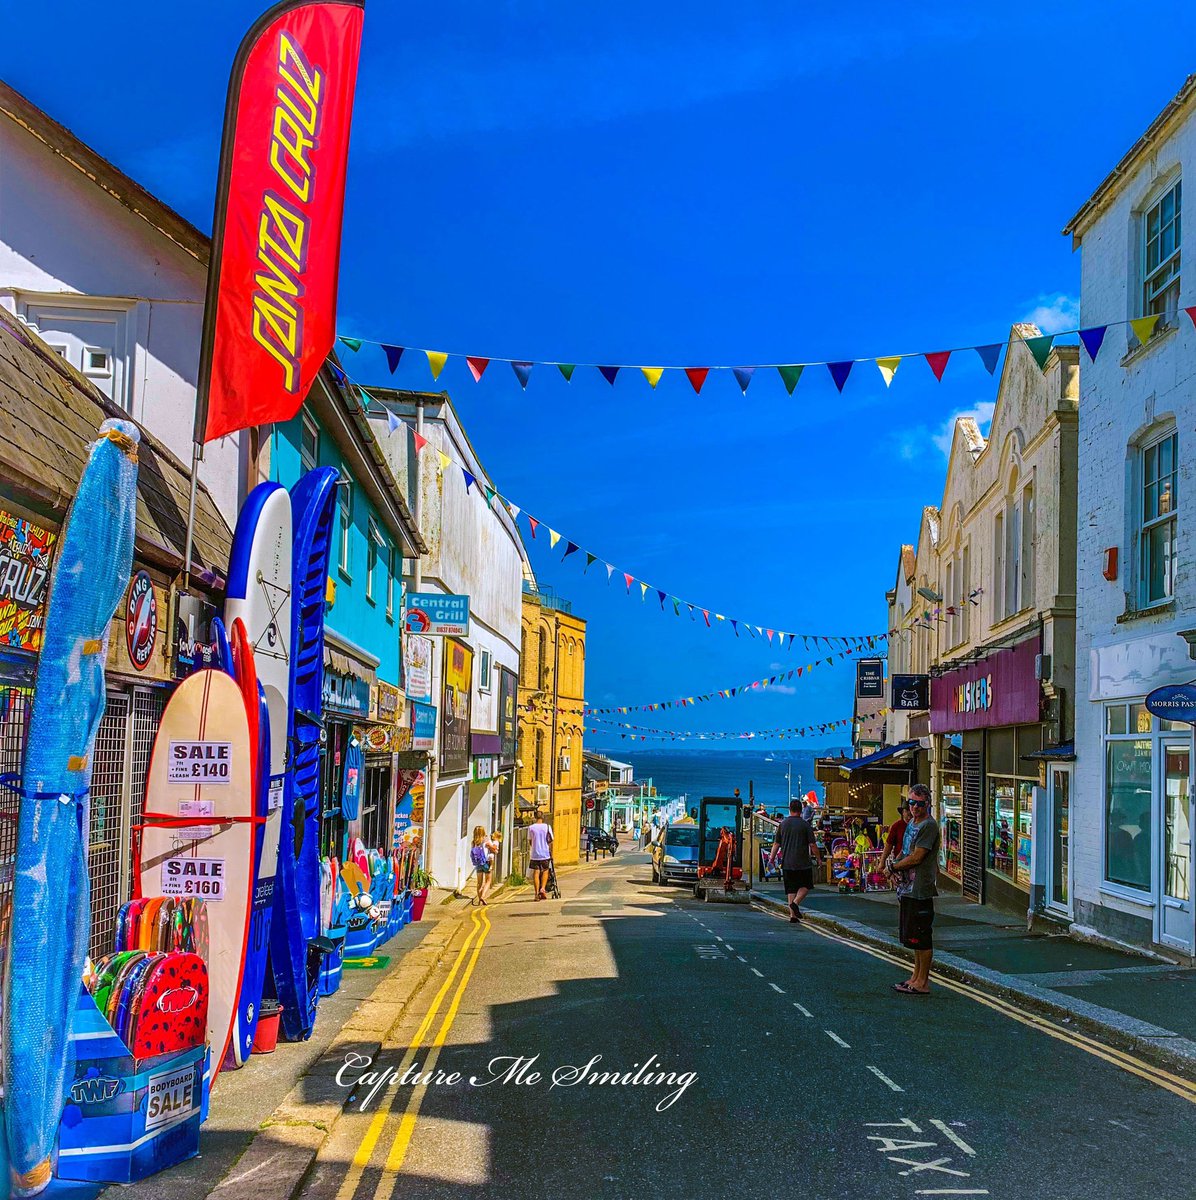 Colourful streets... Blue skies... Amazing sea views... What else can I ask for... #capturemesmiling #photography #capturemesmilingtravel #cornwall #cornwallstreet #coastlines #seaviews #vibrantcolours #colour #streetphotography #locationphotography #ourtravels